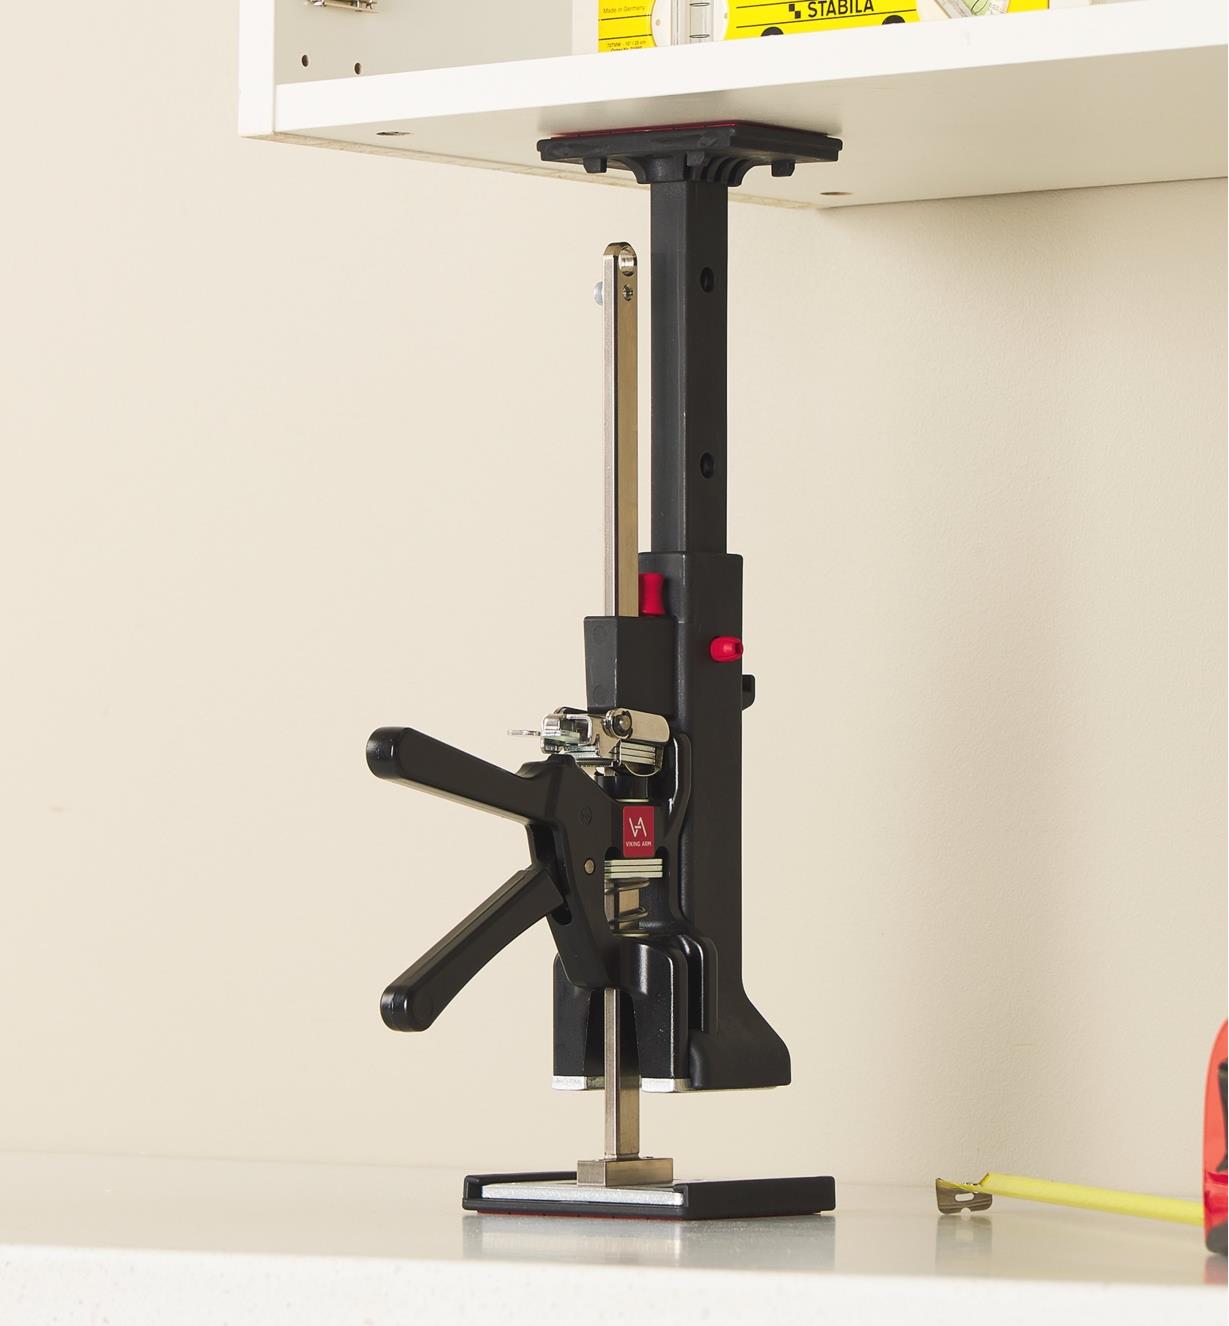 A Viking Arm jack being used with a cabinet installation kit to raise an upper cabinet into position